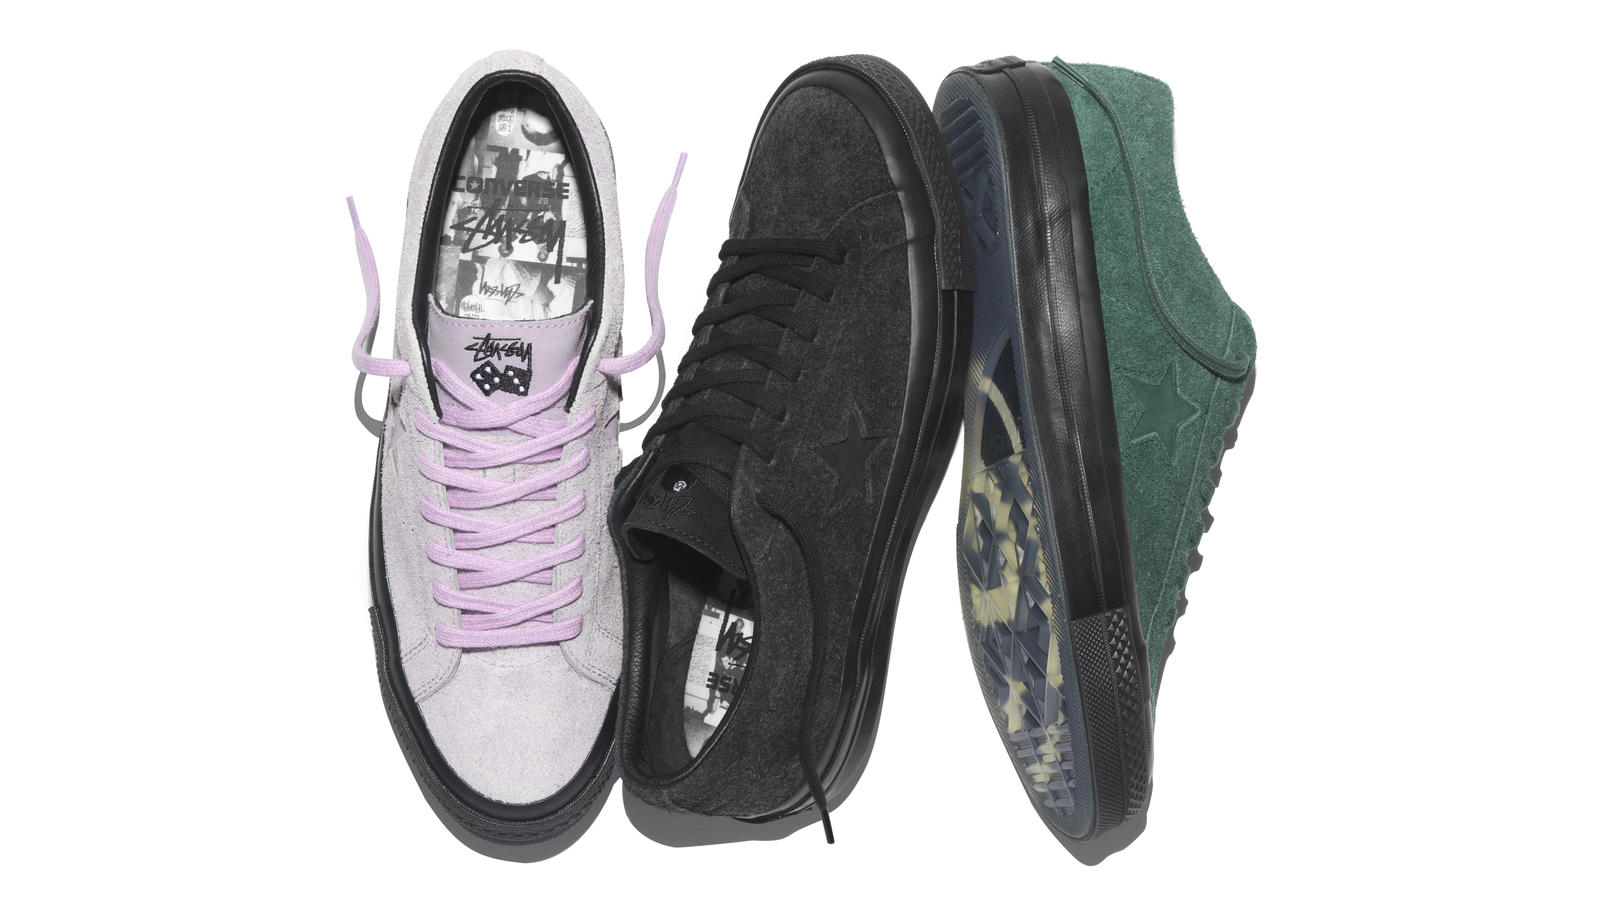 Stussy x Converse One Star '74 Collection | Sole Collector